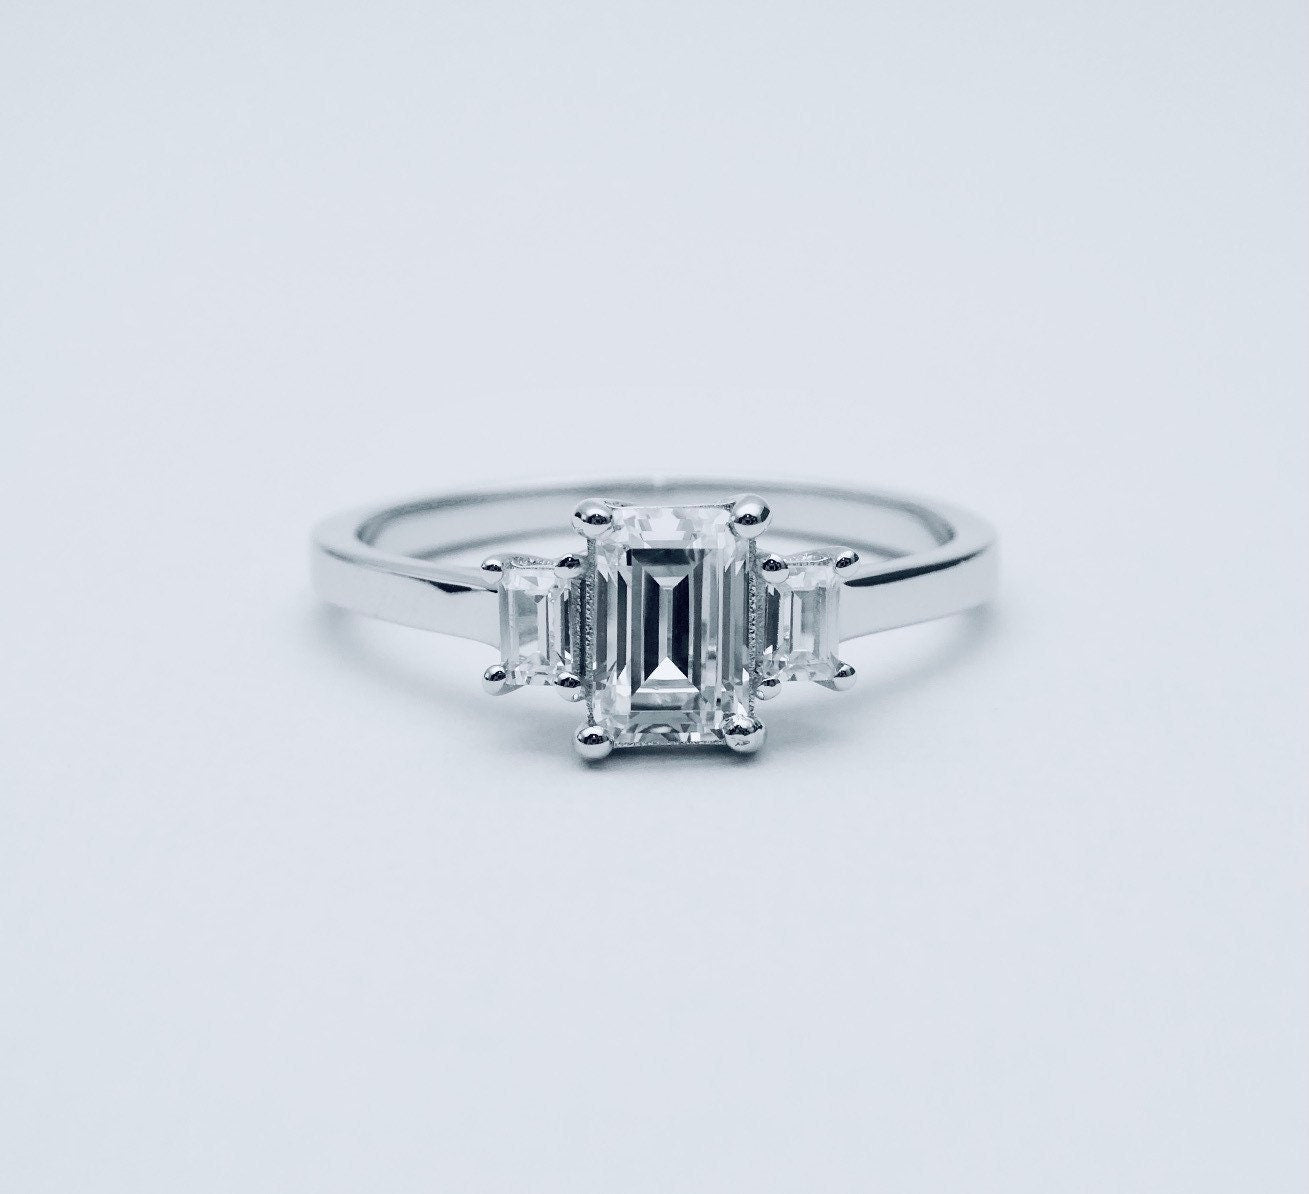 Man made Diamond Emerald cut 3 stone Trilogy ring ring available in Sterling Silver or White Gold Filled - engagement ring